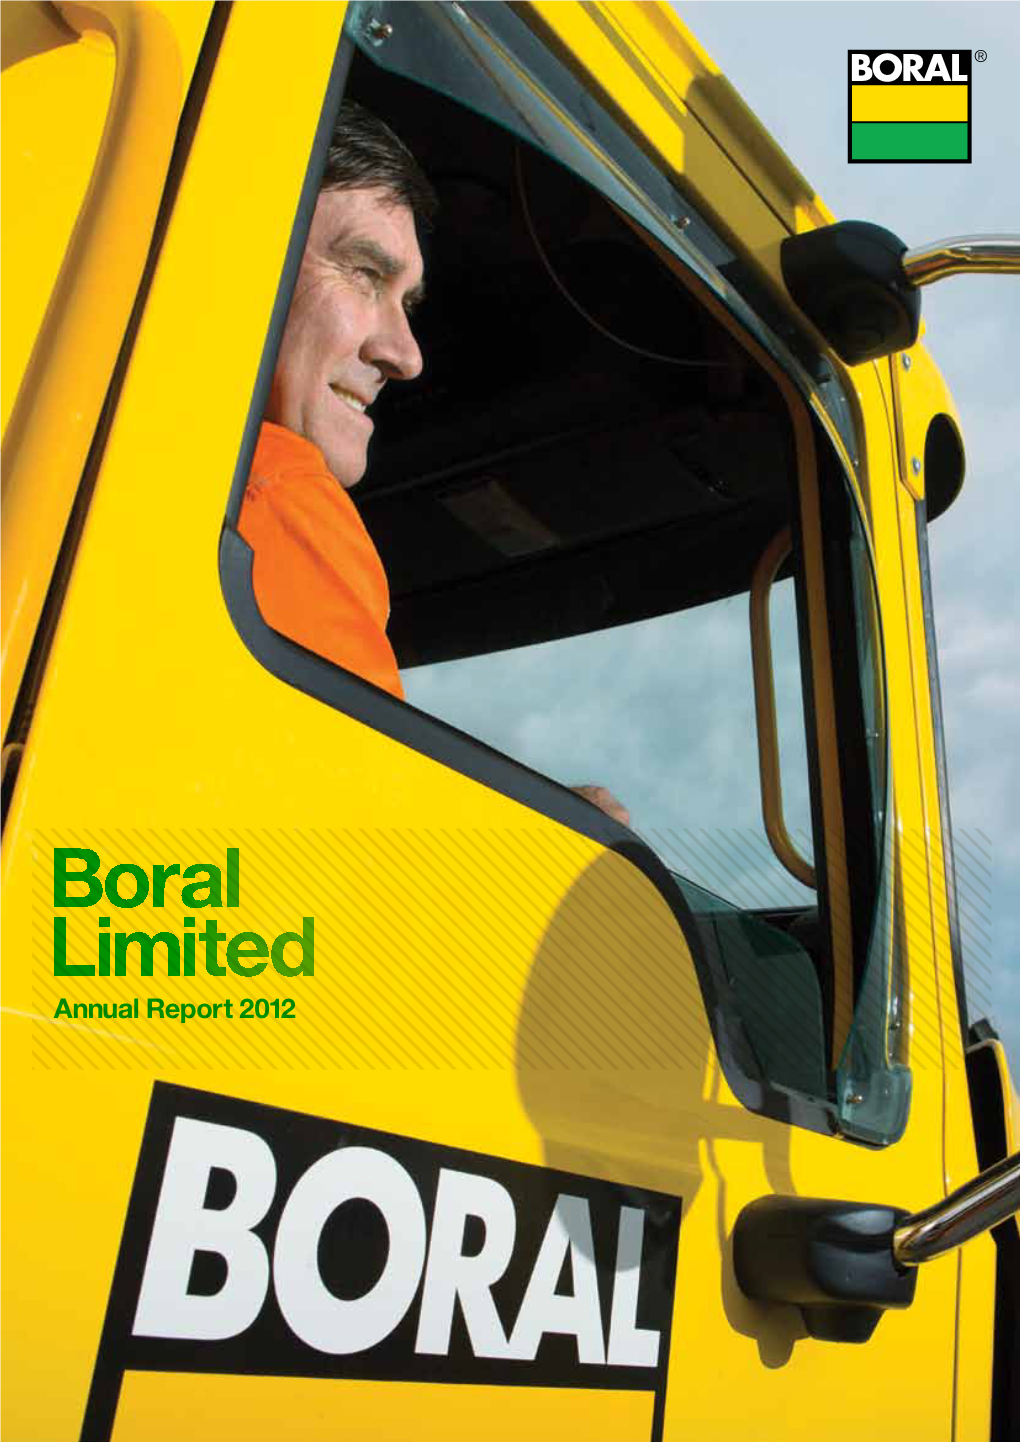 Annual Report 2012 Annual Report 2012 Report Annual Cover Trevor Dickens Heavy Vehicle Tipper Boral Limited Operator for Boral Logistics